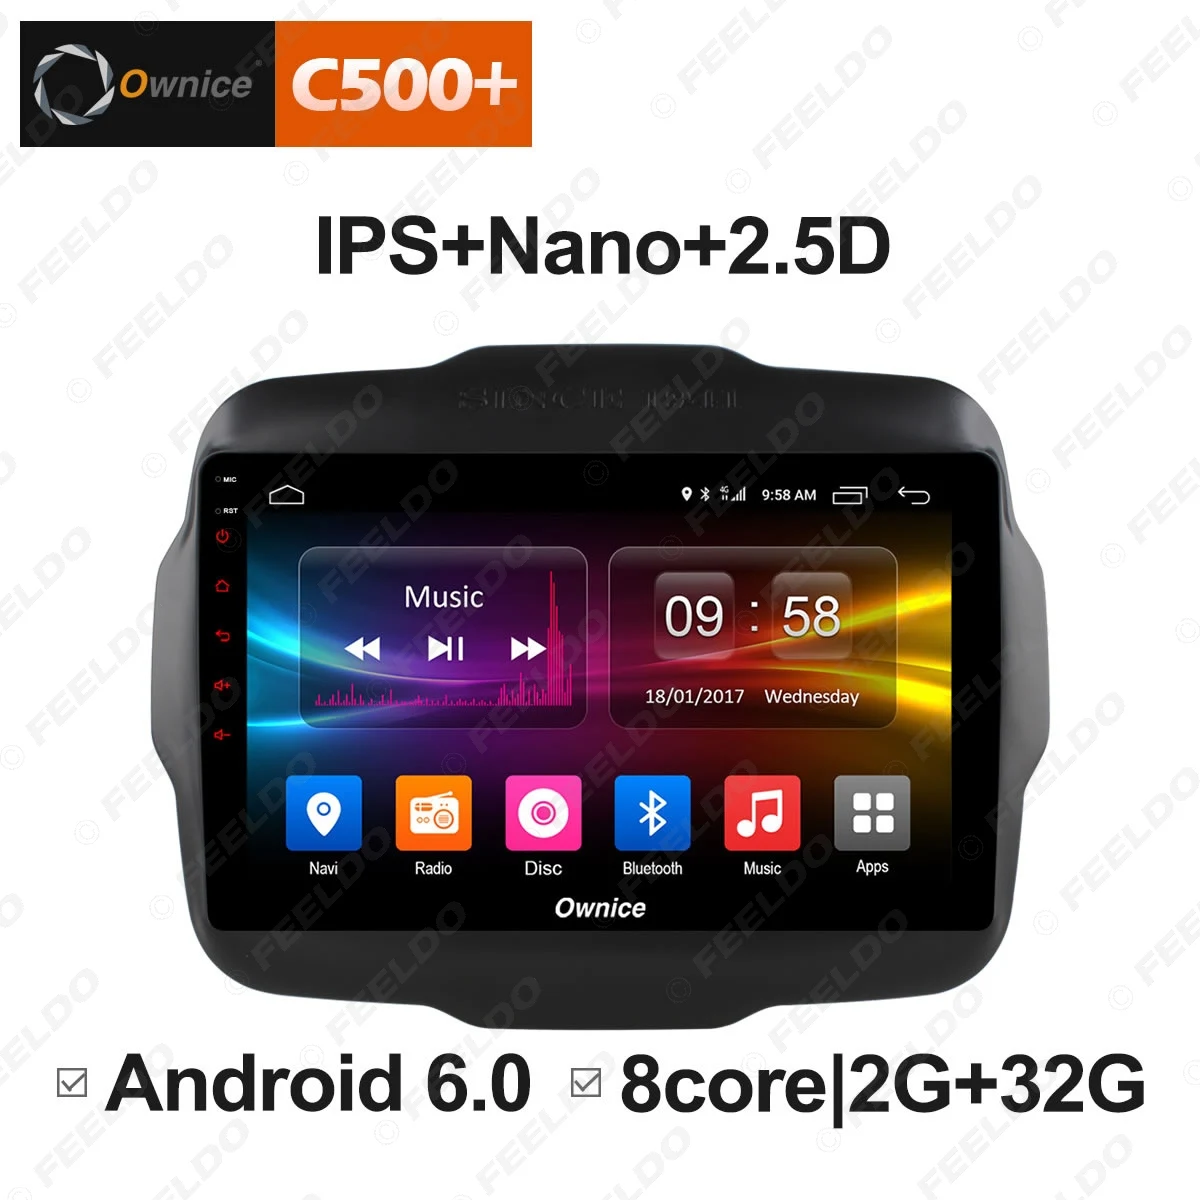 Perfect LEEWA 9" 2.5D Nano IPS Screen Android 8.1 Octa Core/DDR3 2G/32G/4G LTE Car Media Player With GPS/FM RDS For Jeep Renegade 2016 3